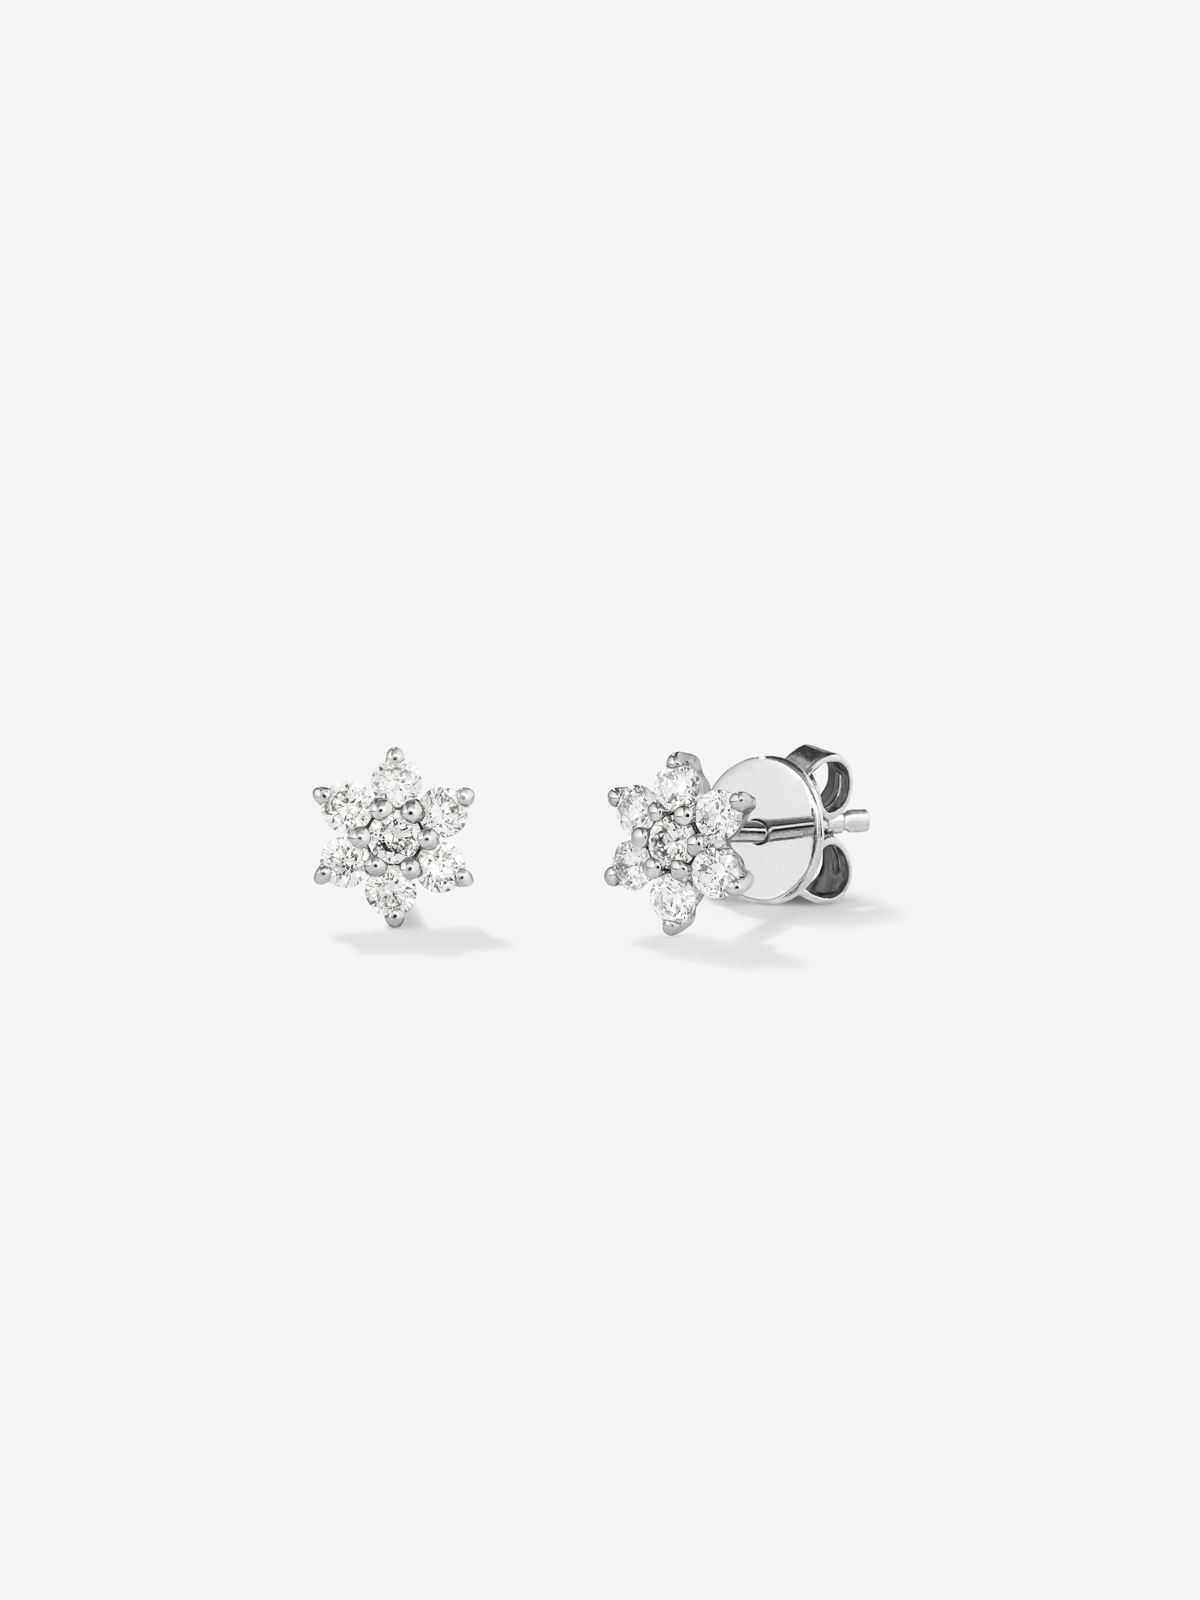 18K white gold earrings with bright 0.3 CTS diamonds shaped like a star -shaped